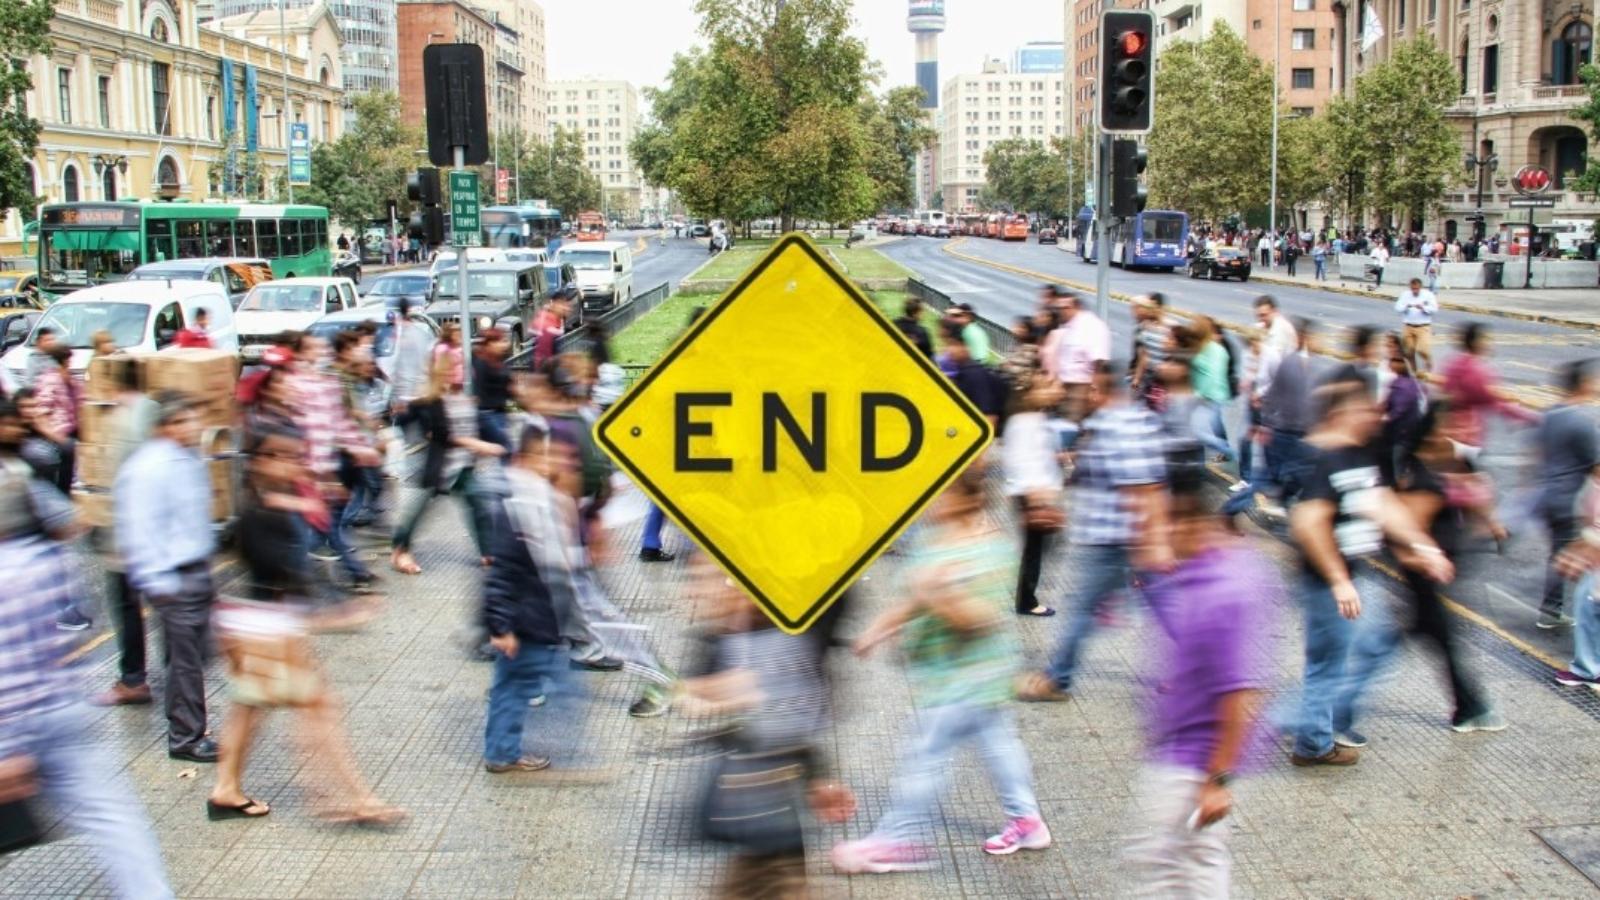 image showing end sign with a busy street in the background.